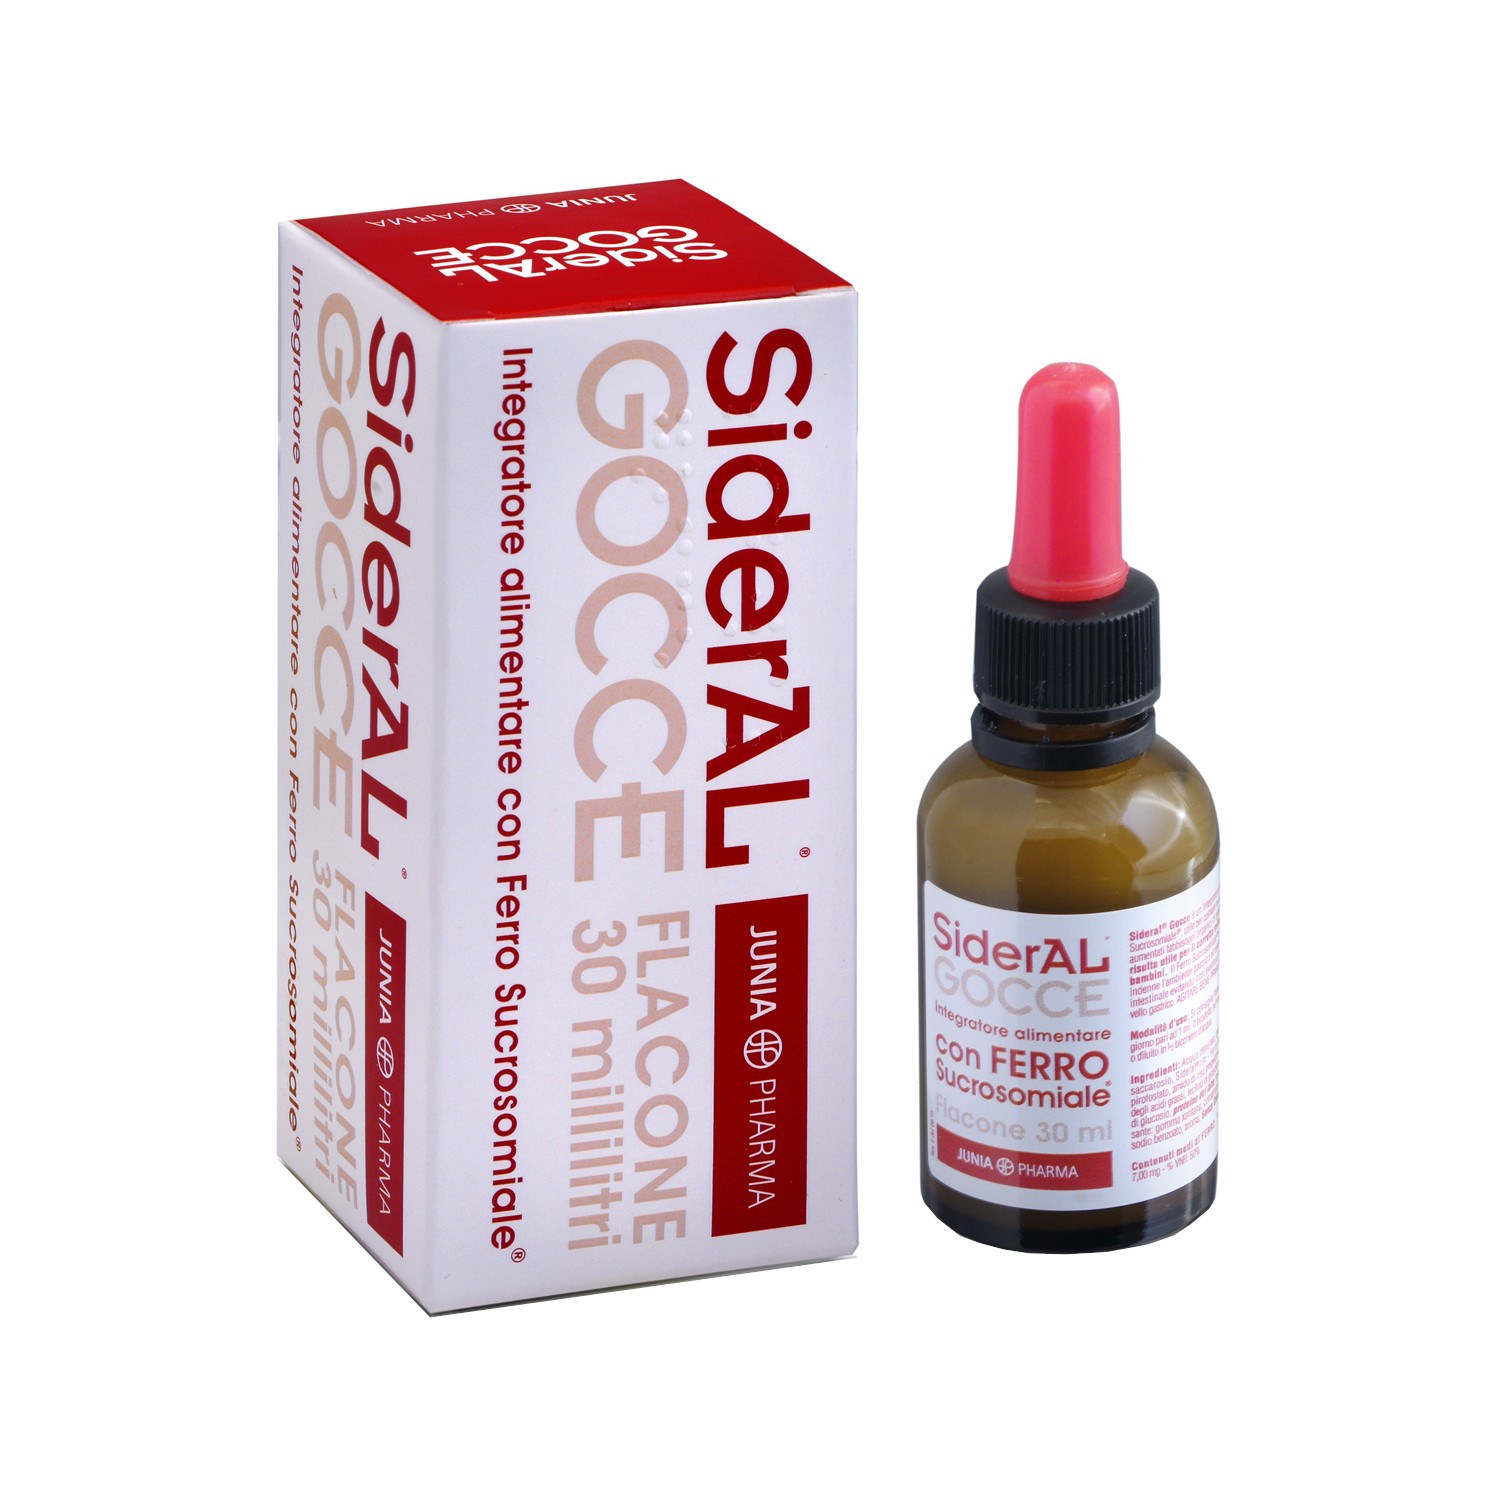 SIDERAL GOCCE 30 ml